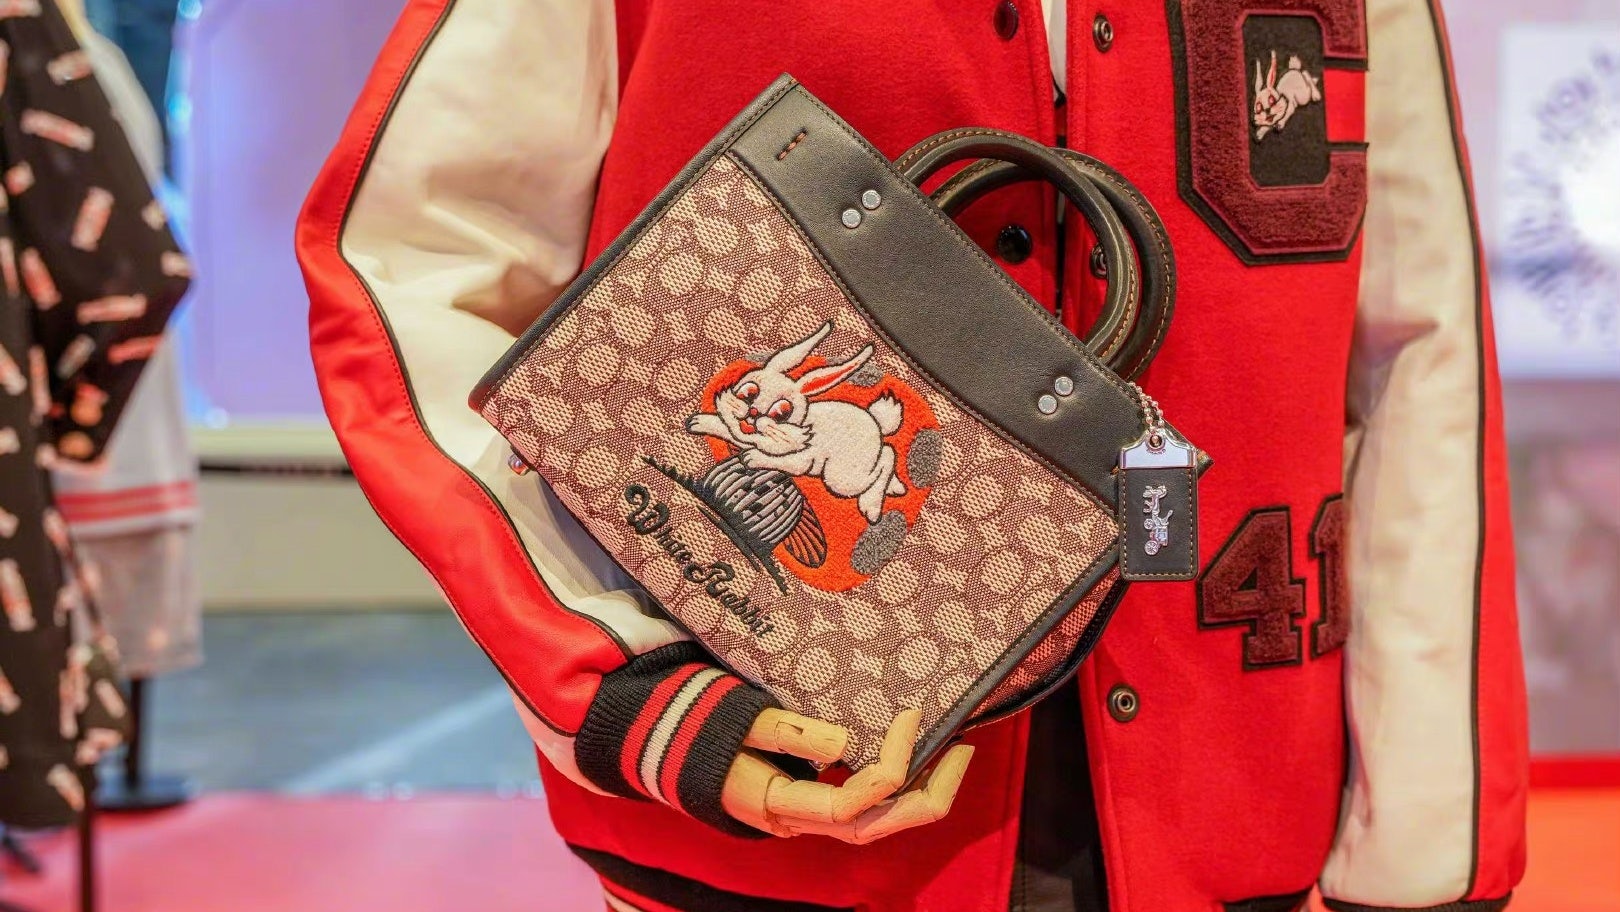 The American fashion house's latest efforts to connect with Chinese consumers through a nostalgic White Rabbit candy collaboration is its sweetest yet. Photo: Coach